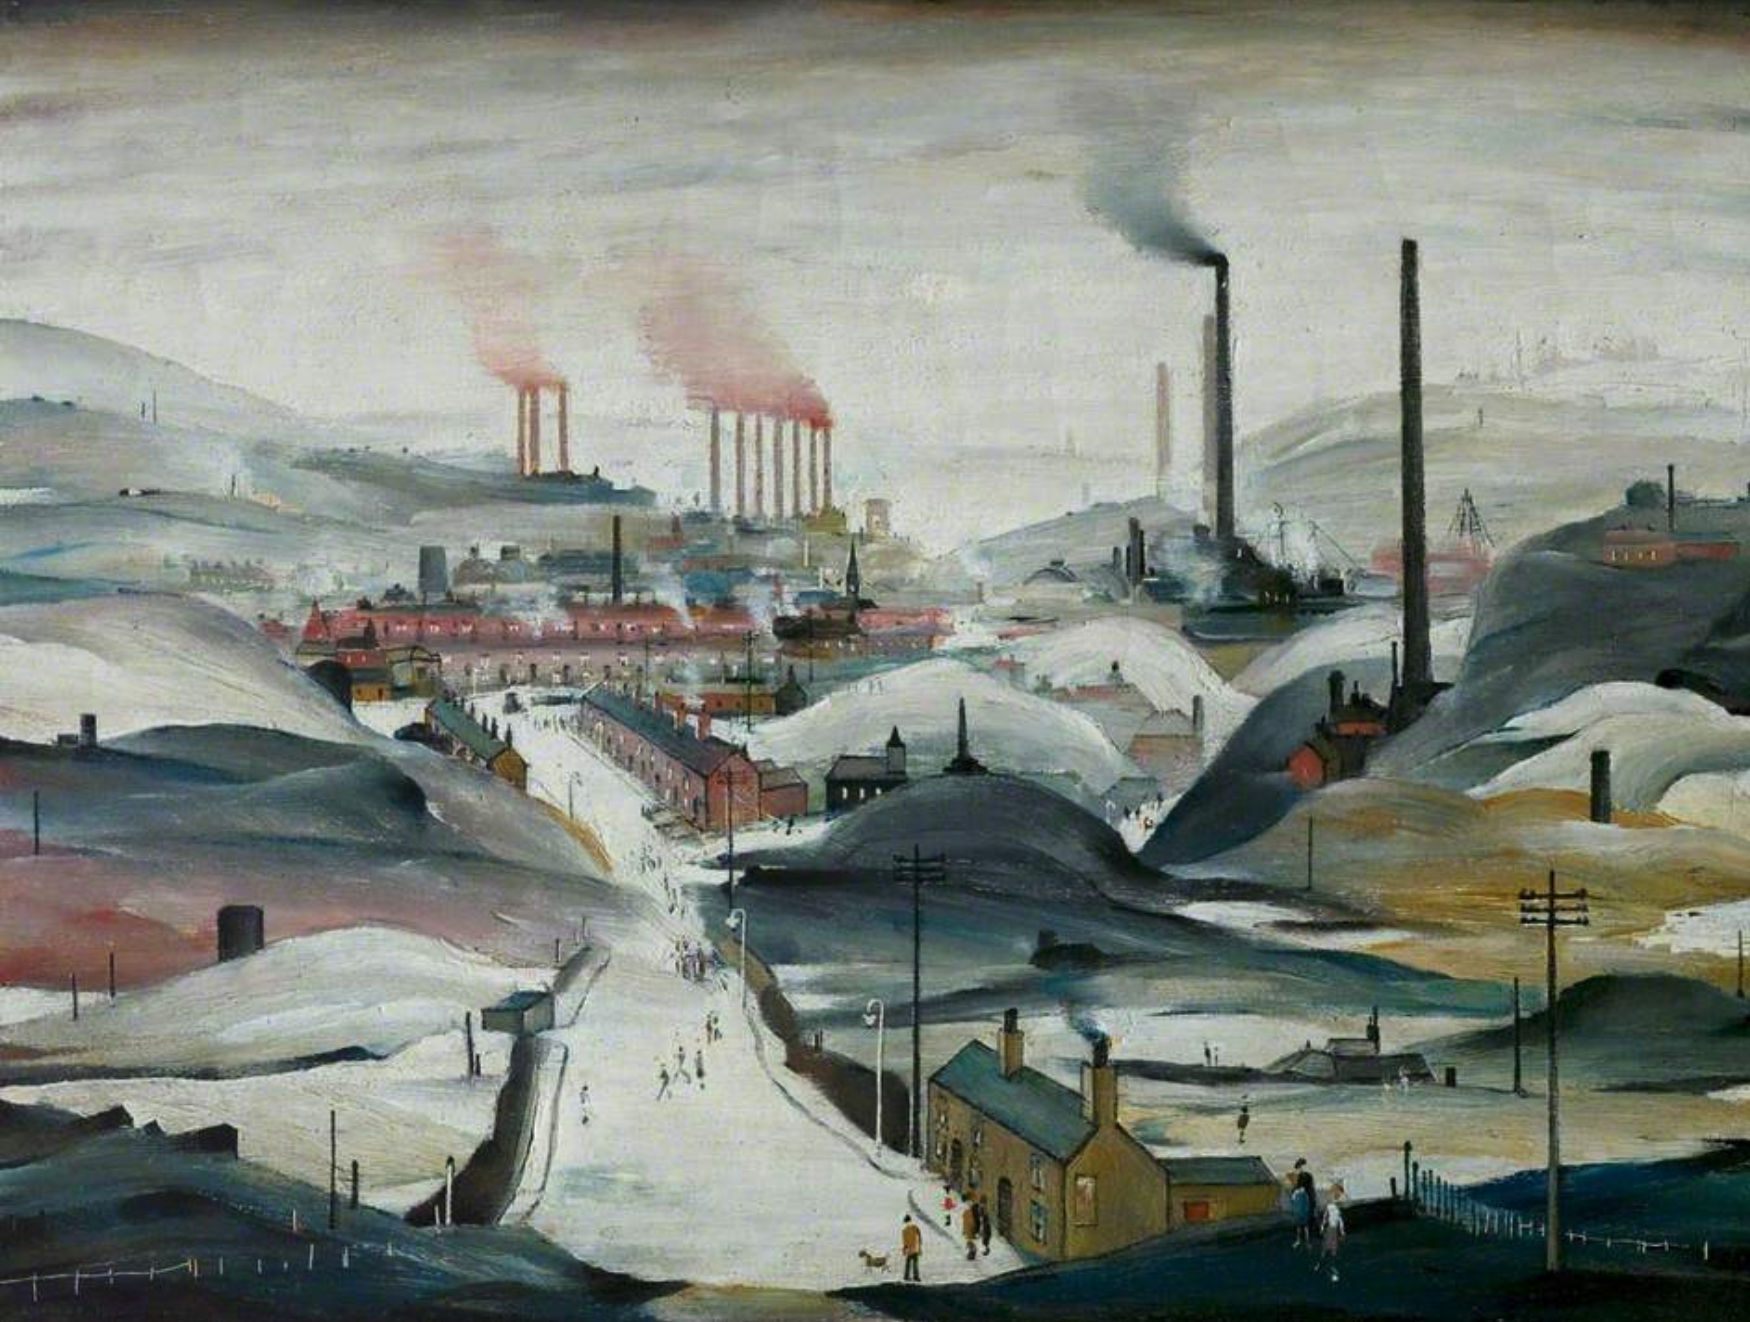 Industrial Panorama (1953) by Laurence Stephen Lowry (1887 - 1976), English artist.